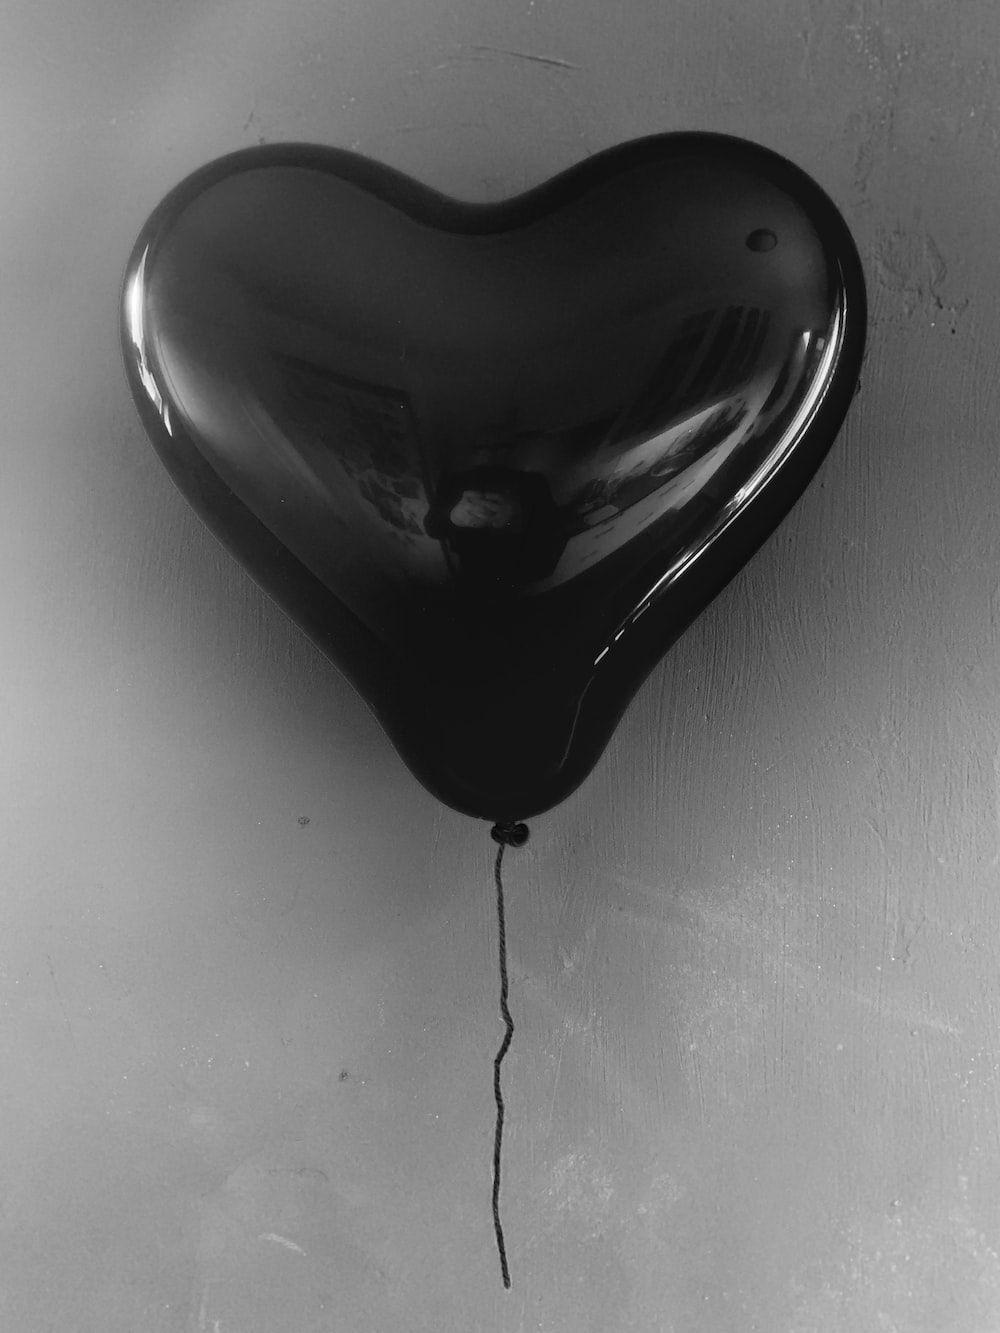 Black Heart Picture. Download Free Image